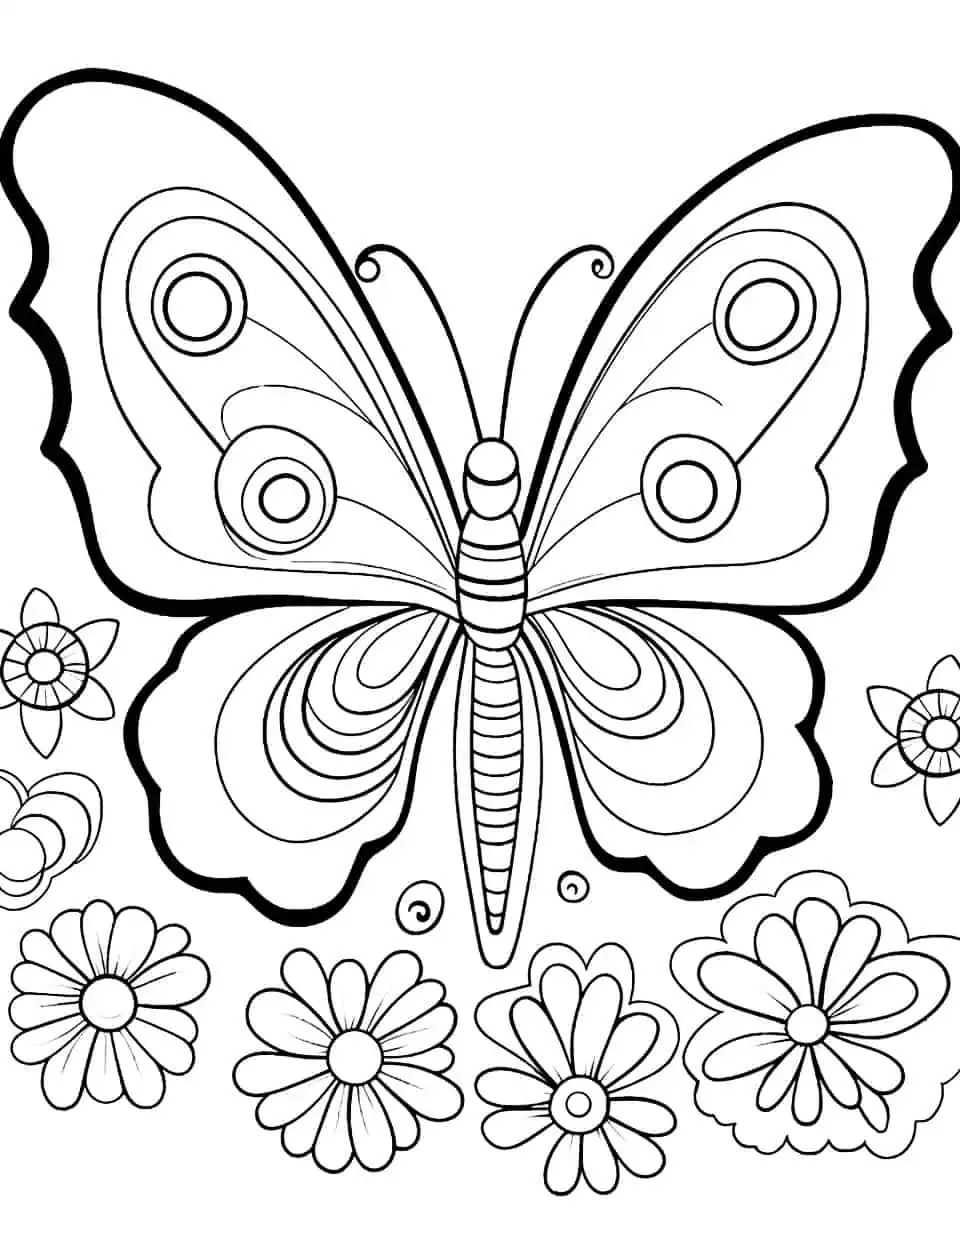 Flower Power Butterfly Coloring Page - A coloring page showcasing butterflies and flowers in a delightful fusion of colors.